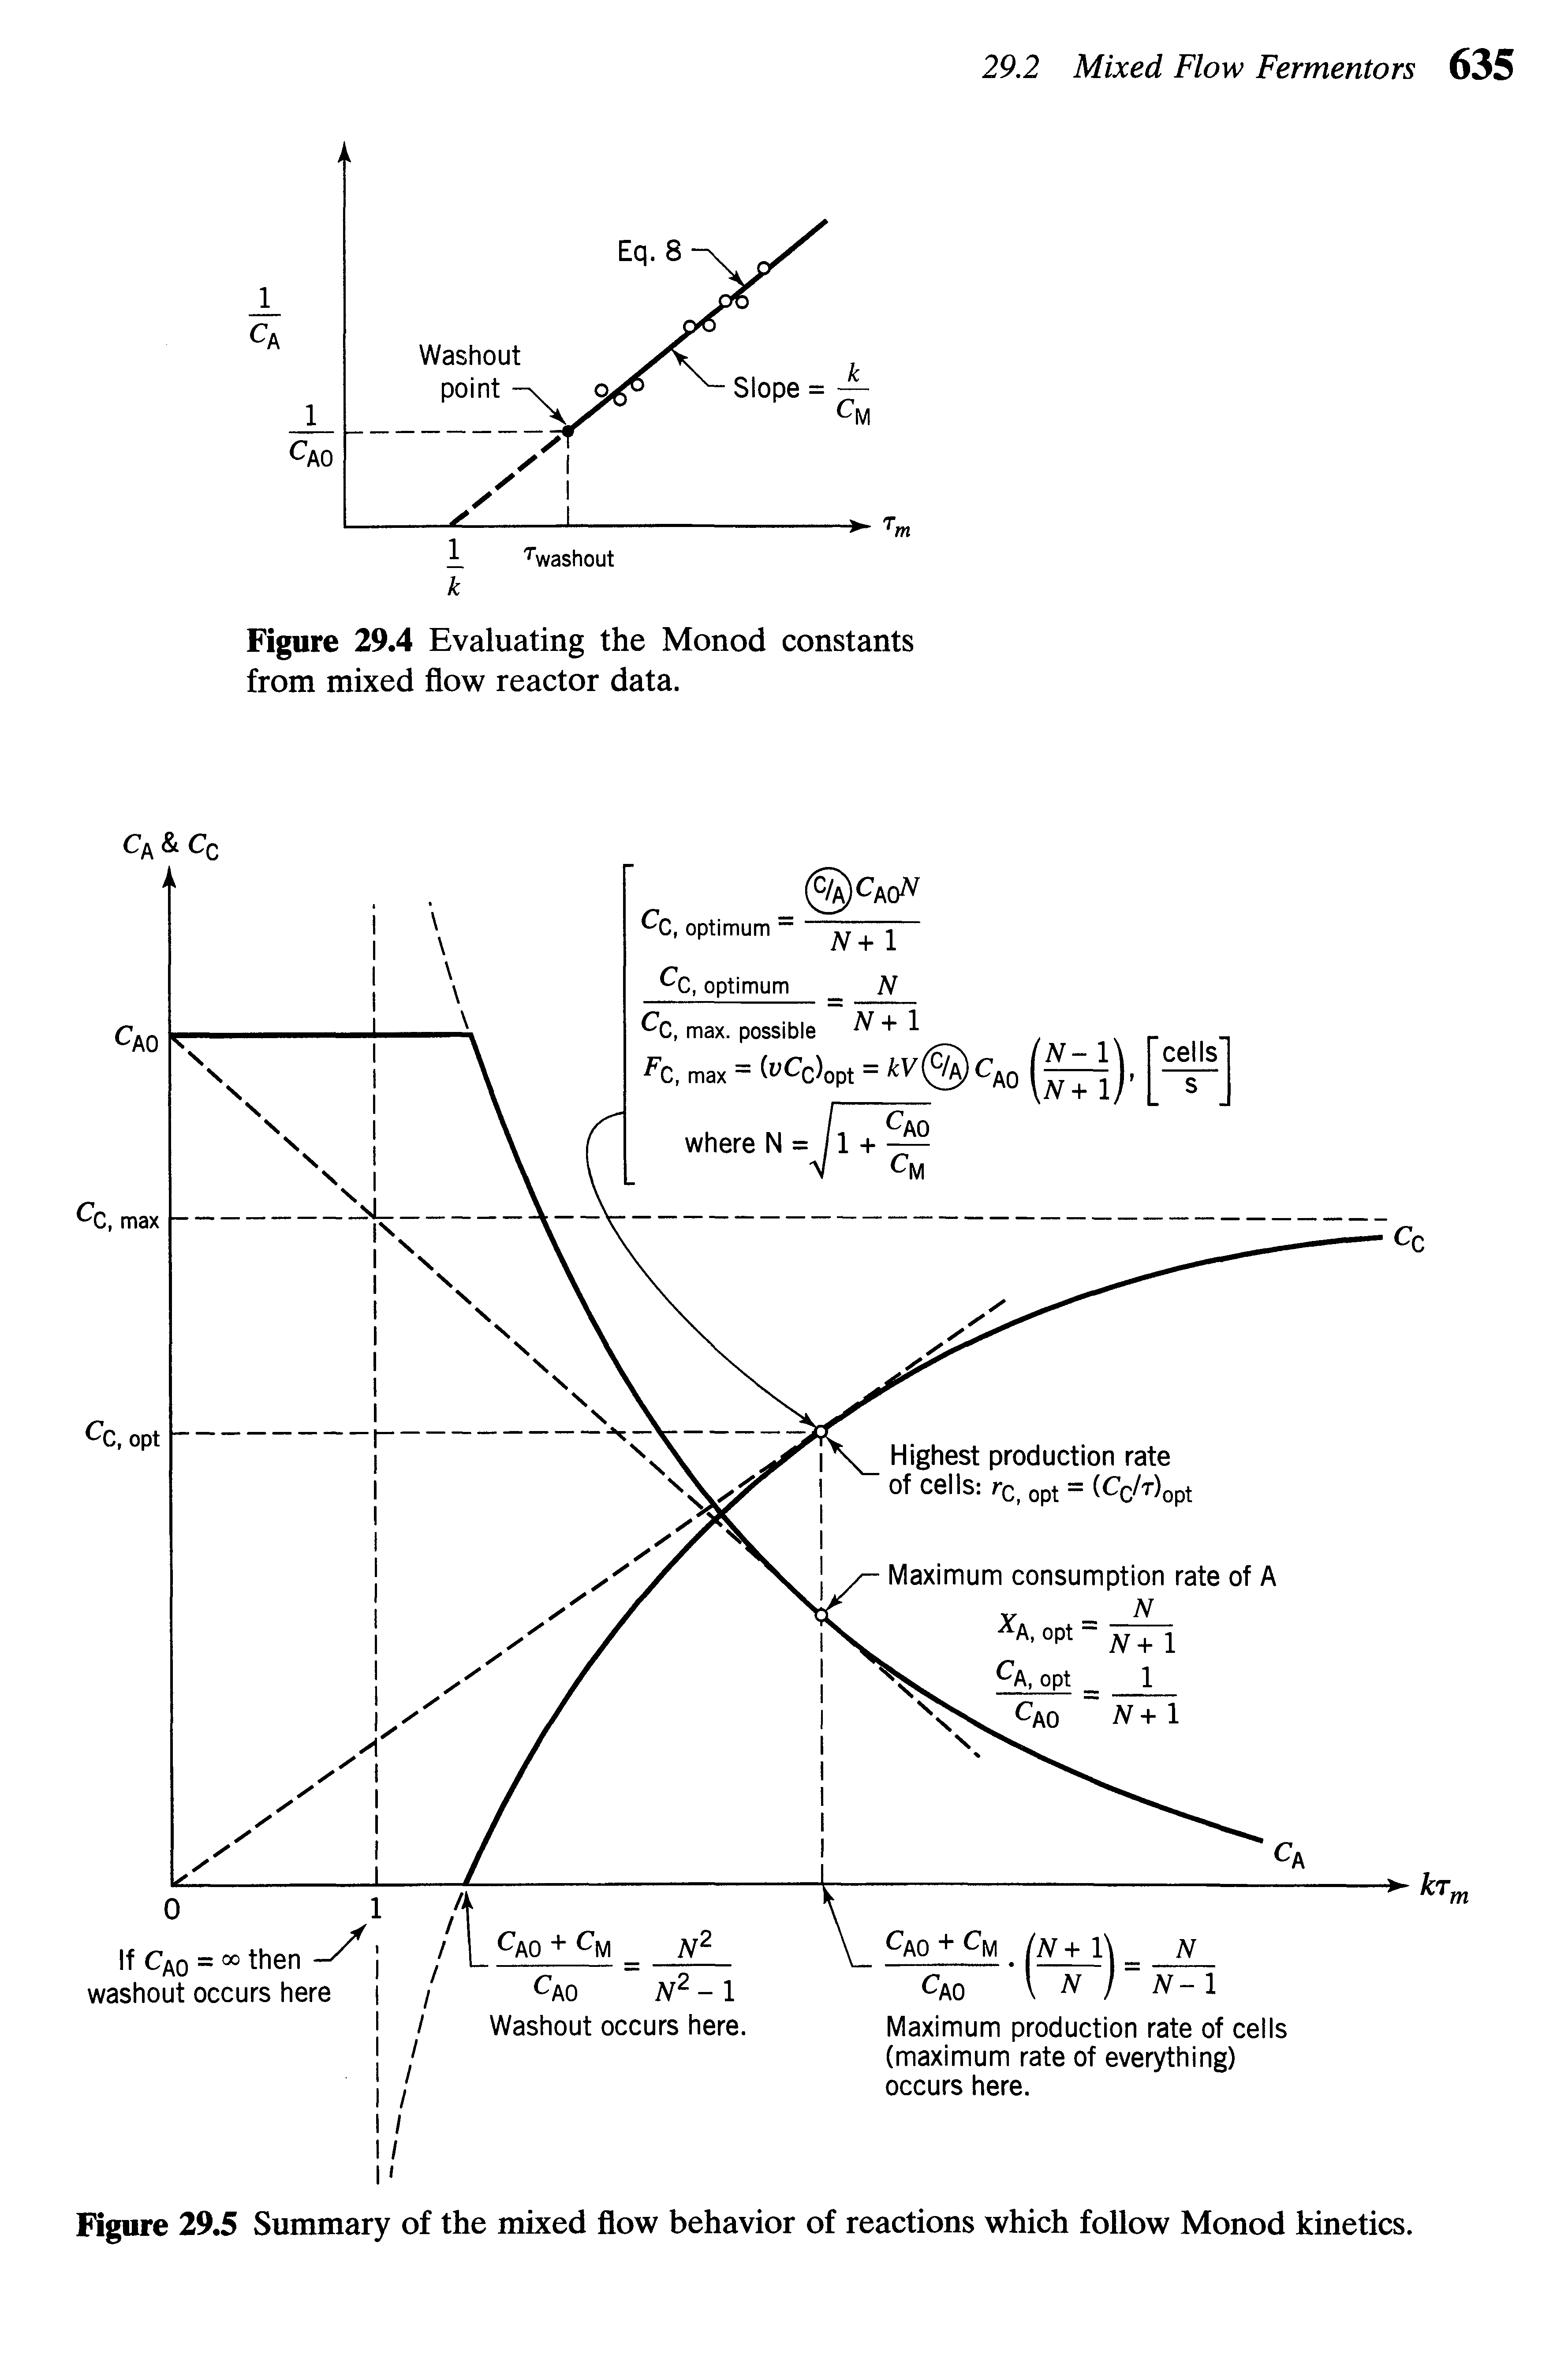 Figure 29.5 Summary of the mixed flow behavior of reactions which follow Monod kinetics.